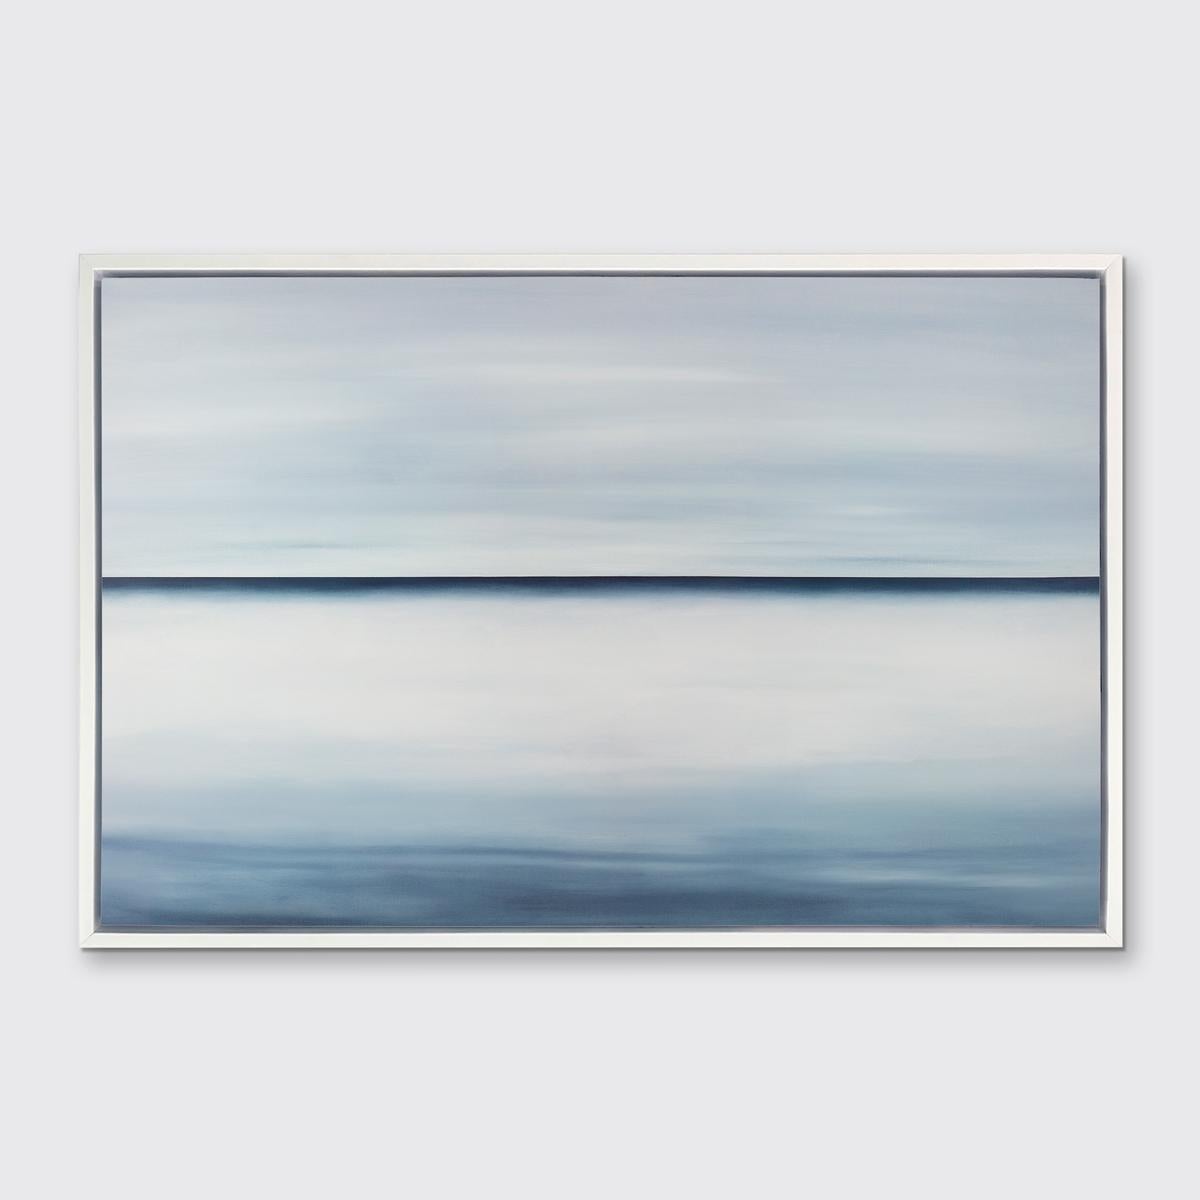 Tony Iadicicco Abstract Print - "Open Water" Framed Limited Edition Giclee Print, 40" x 60"